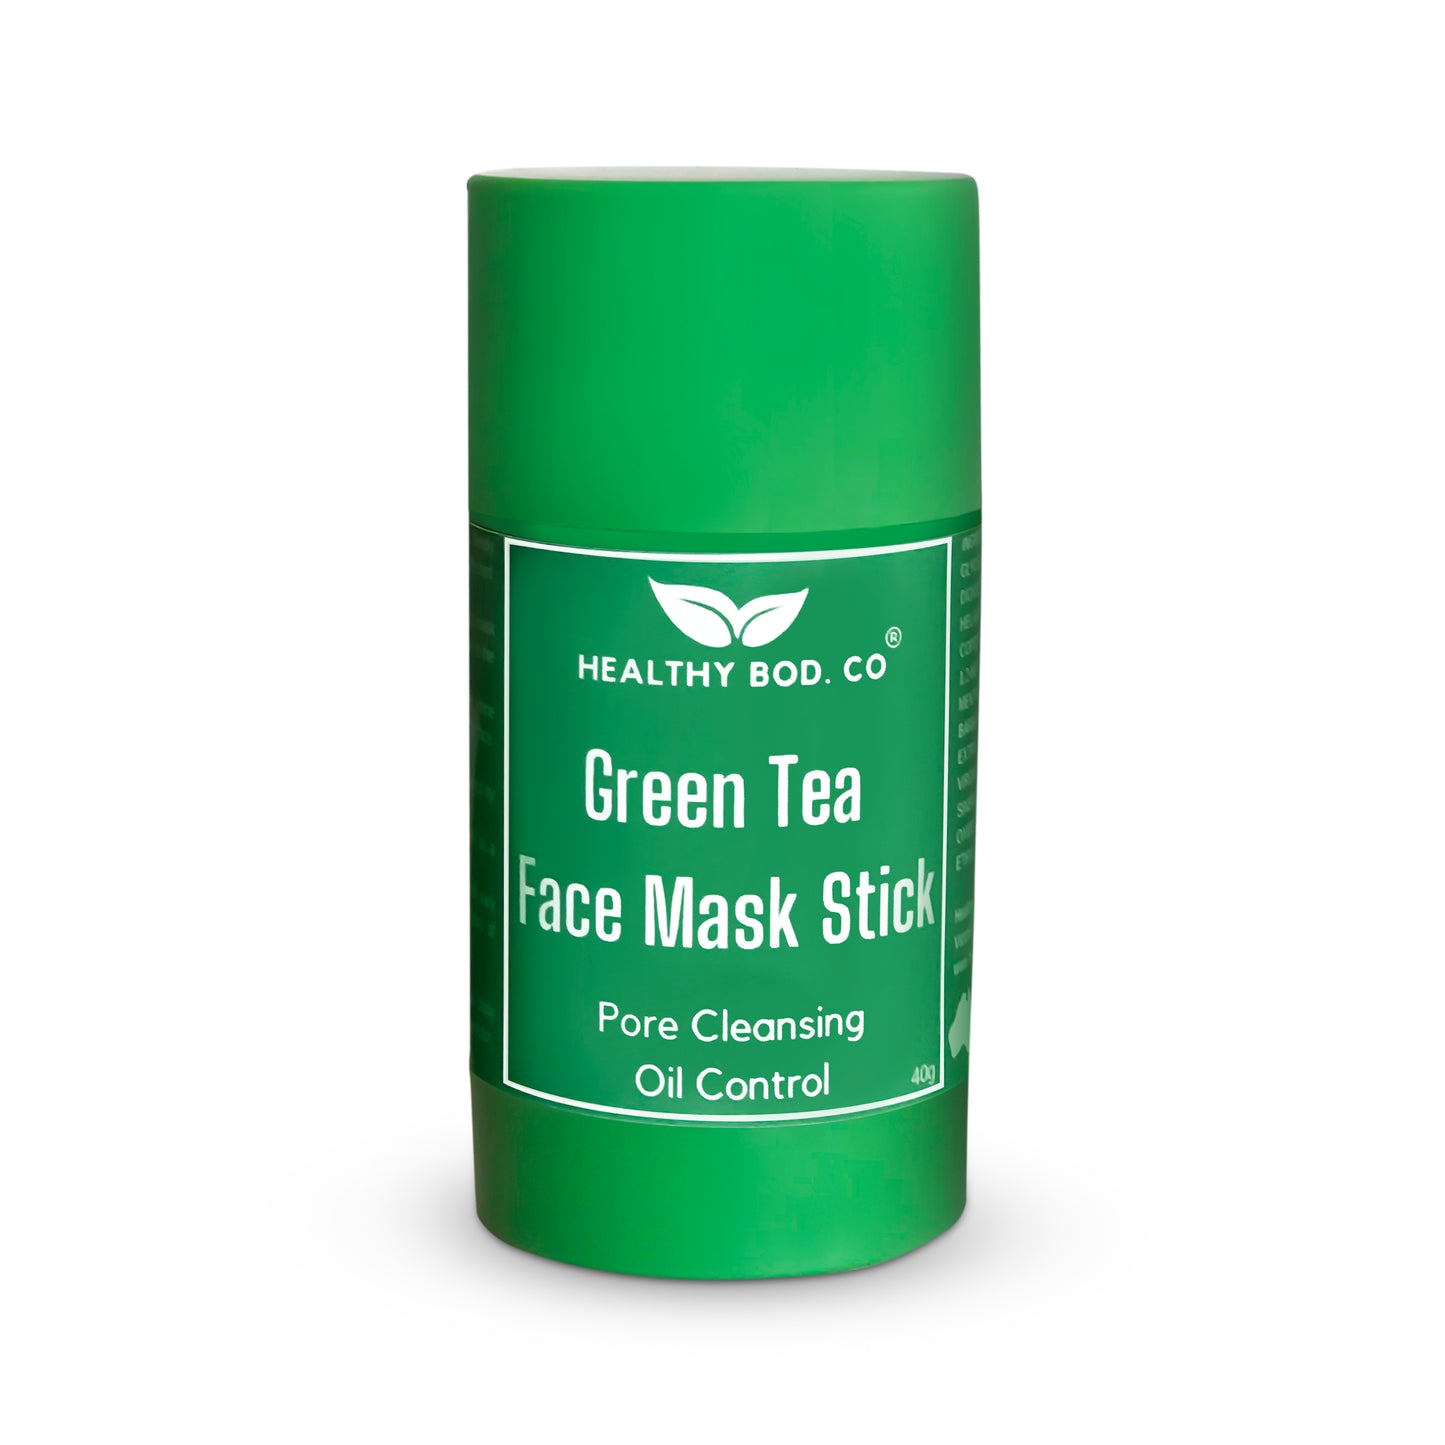 Kaolin Clay Mask Stick Infused with Green Tea for Fresh Skin